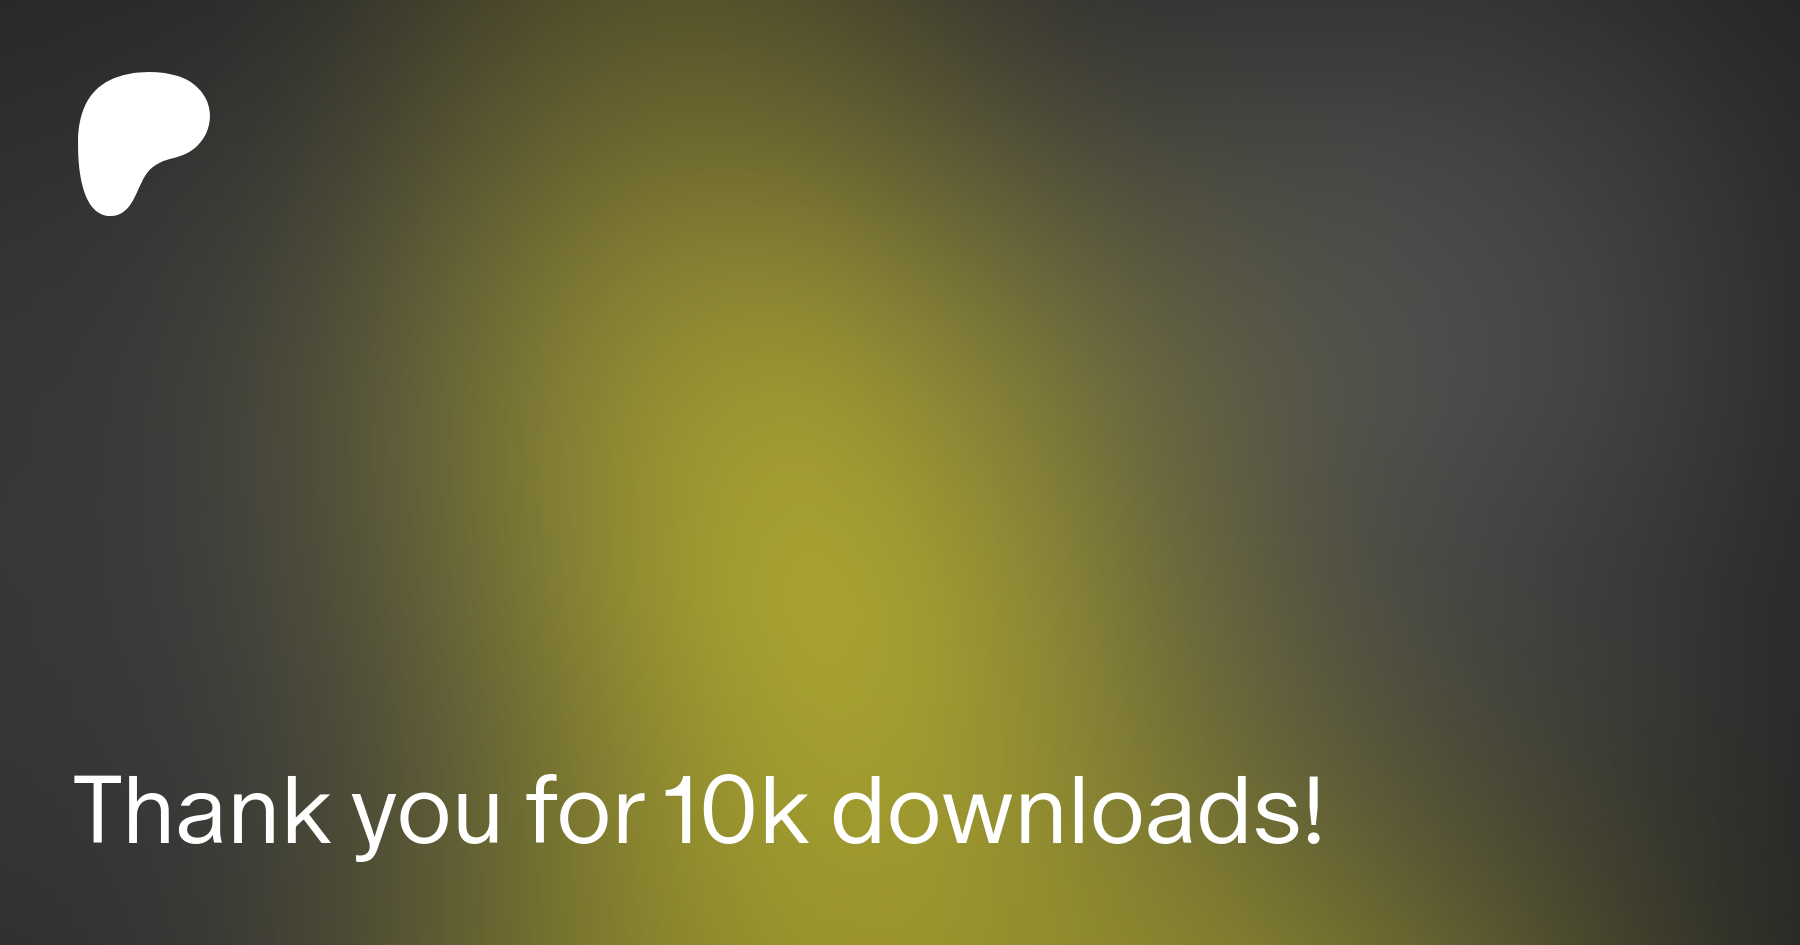 Thank you for 10k downloads! | Patreon